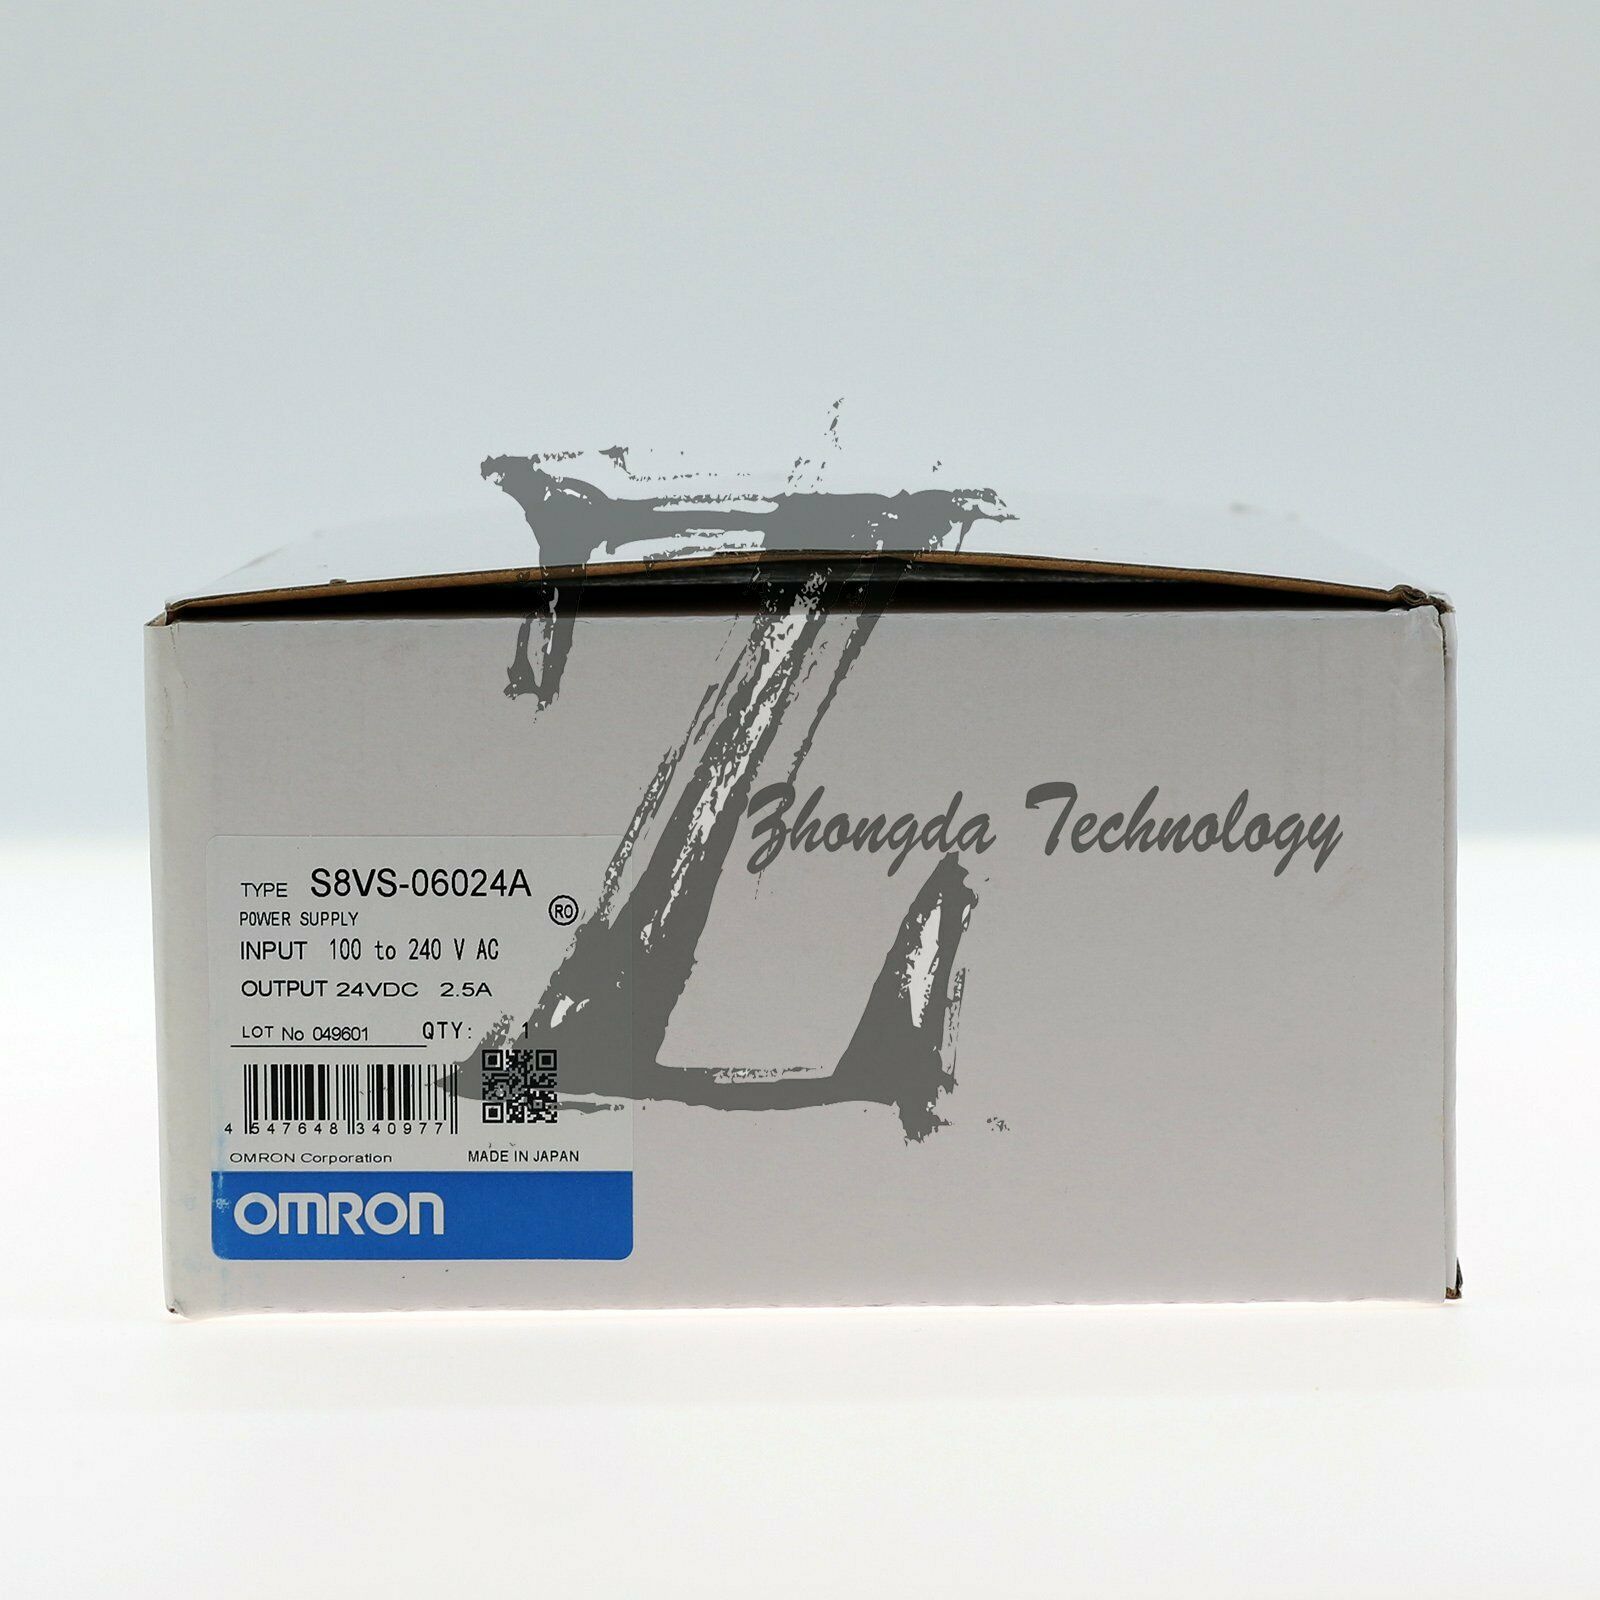 1PC NEW Omron in box S8VS-06024A Switching Power Supply one year warranty KOEED $0-100, 80%, import_2020_10_10_031751, OMRON, PLC, S8VS